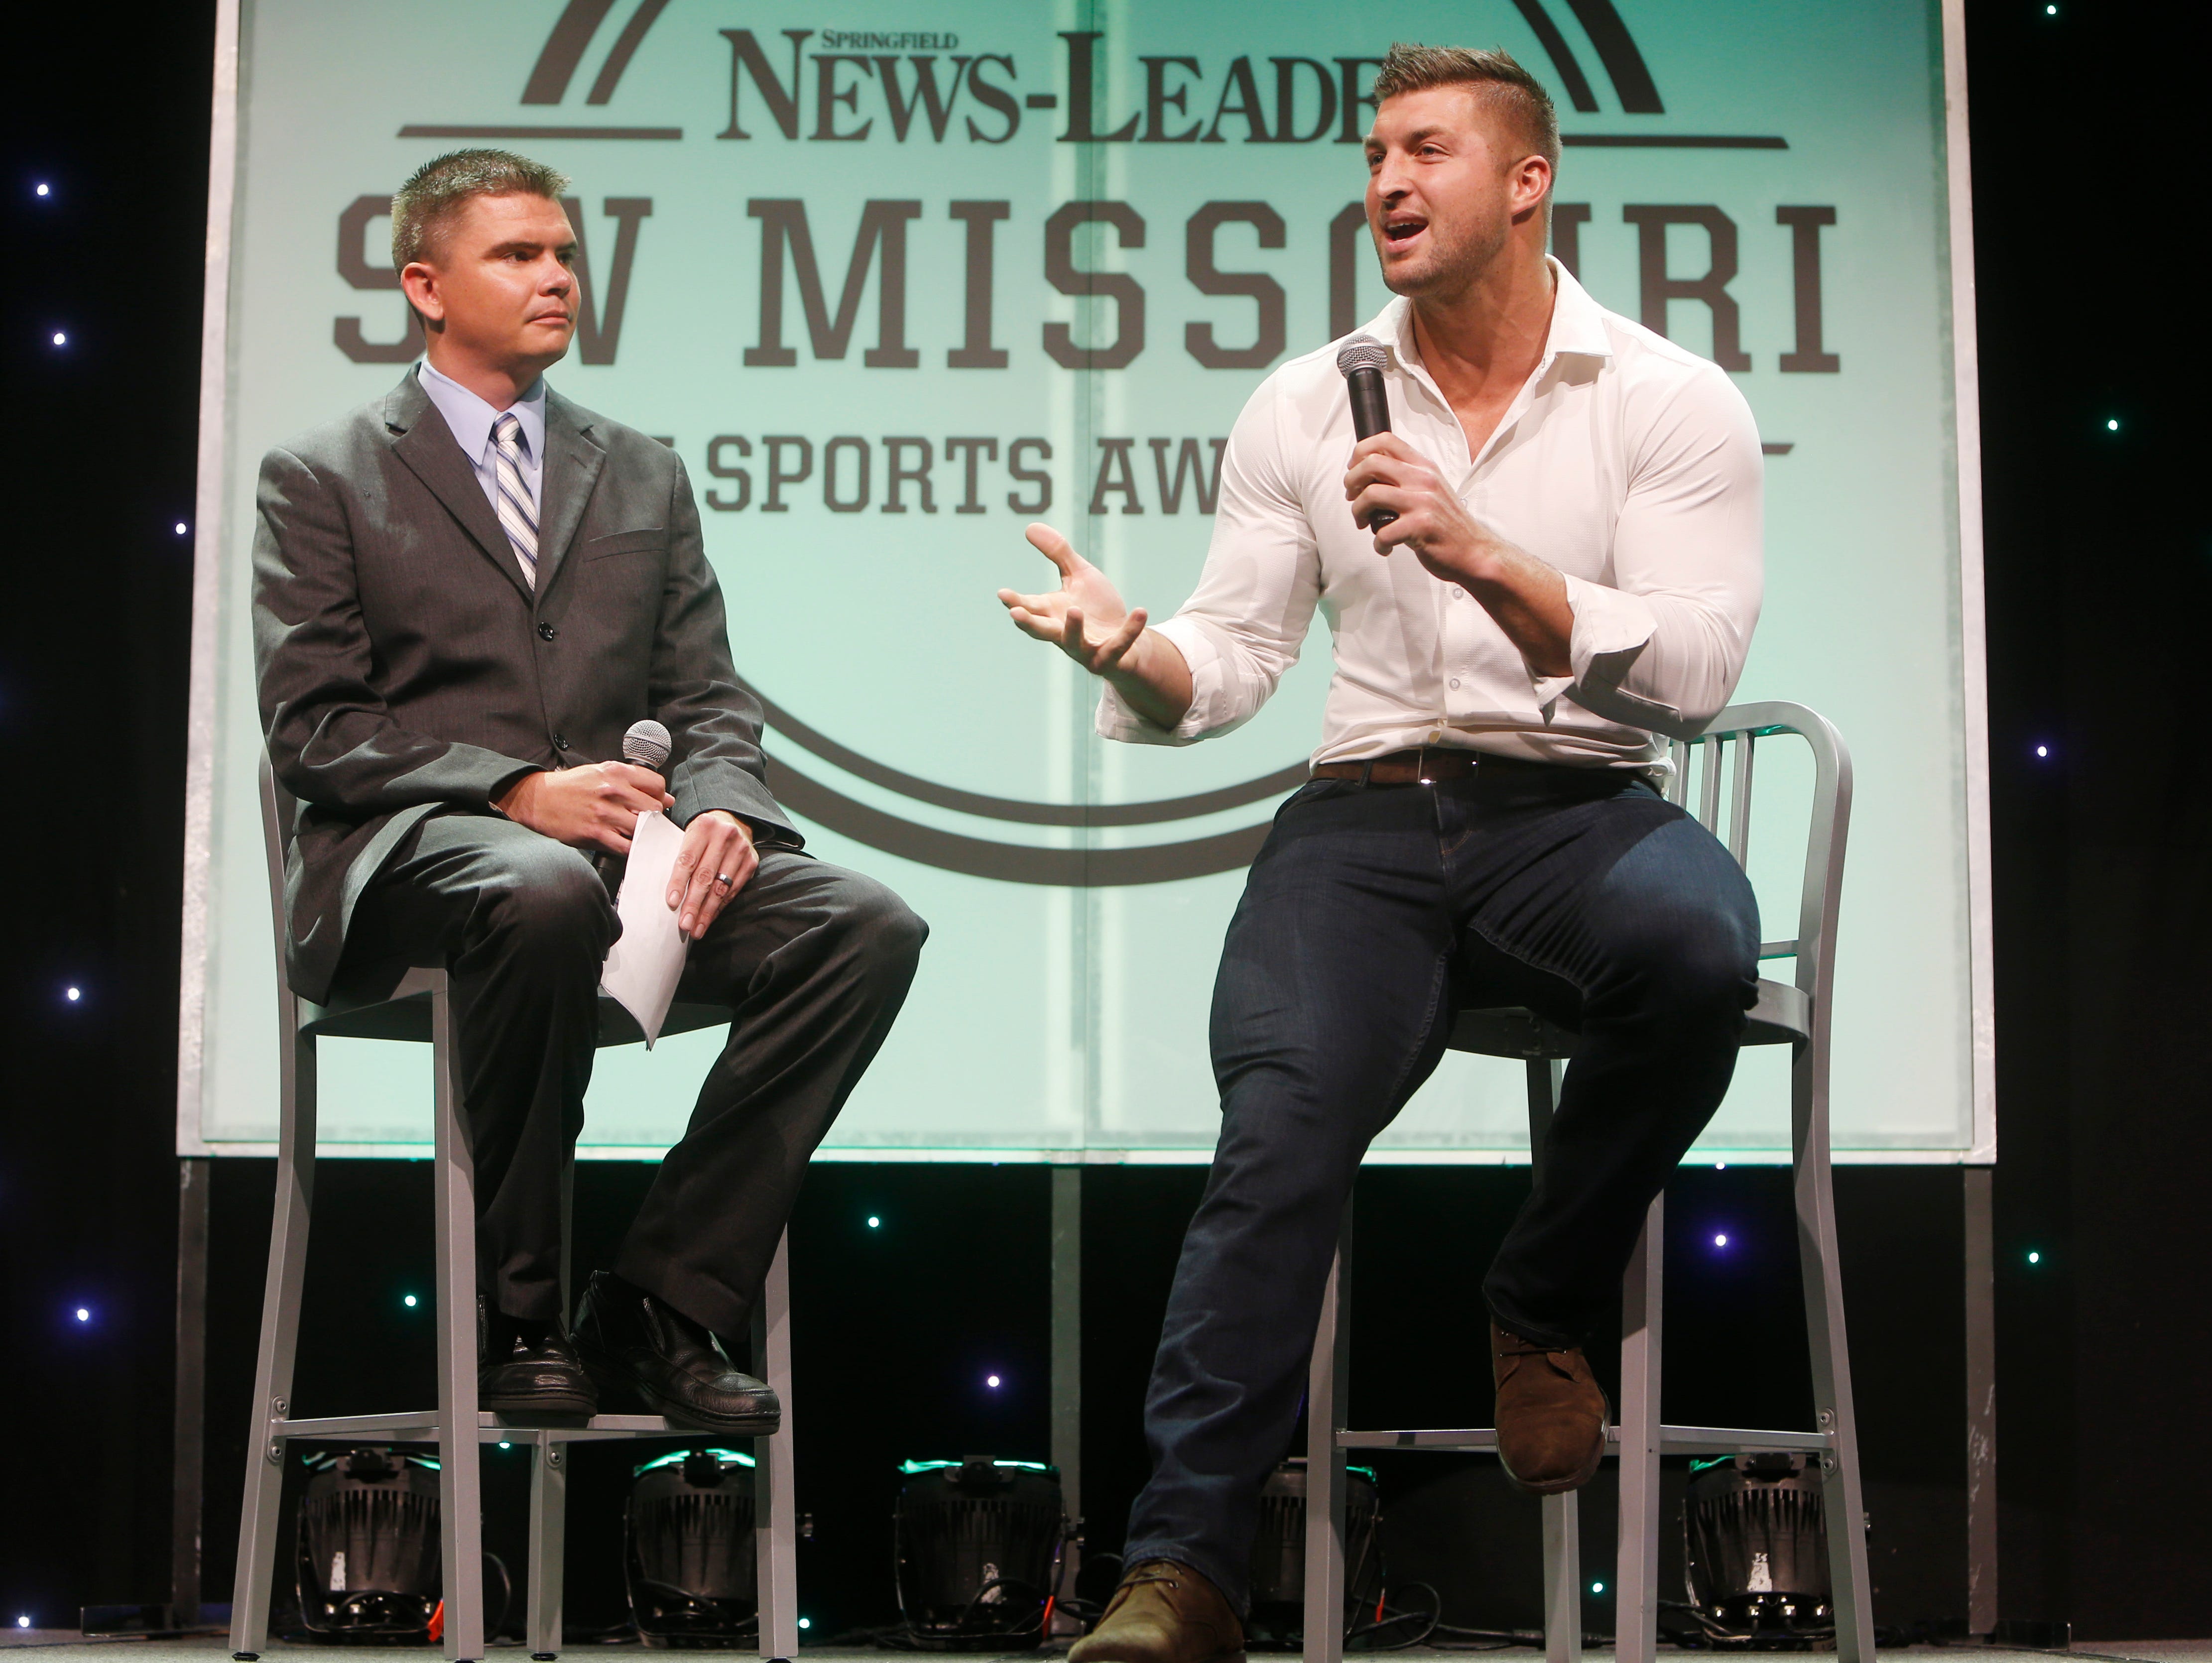 News-Leader prep sports reporter Rance Burger interviews Tim Tebow during the Southwest Missouri Sports Awards.